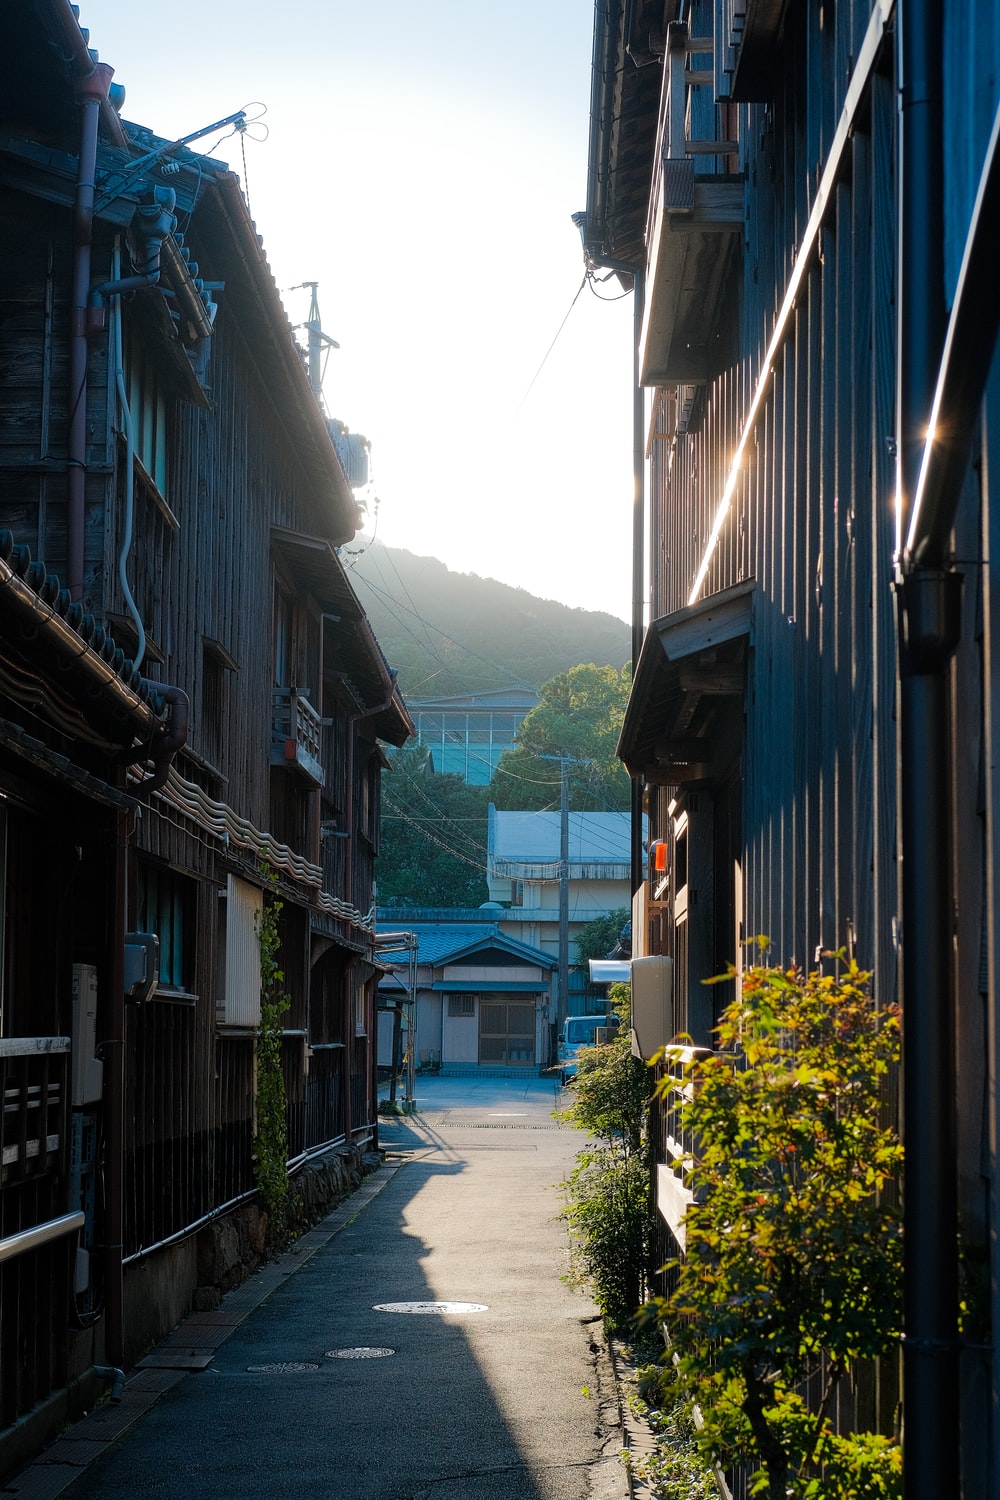 Japan Countryside Picture. Download Free Image